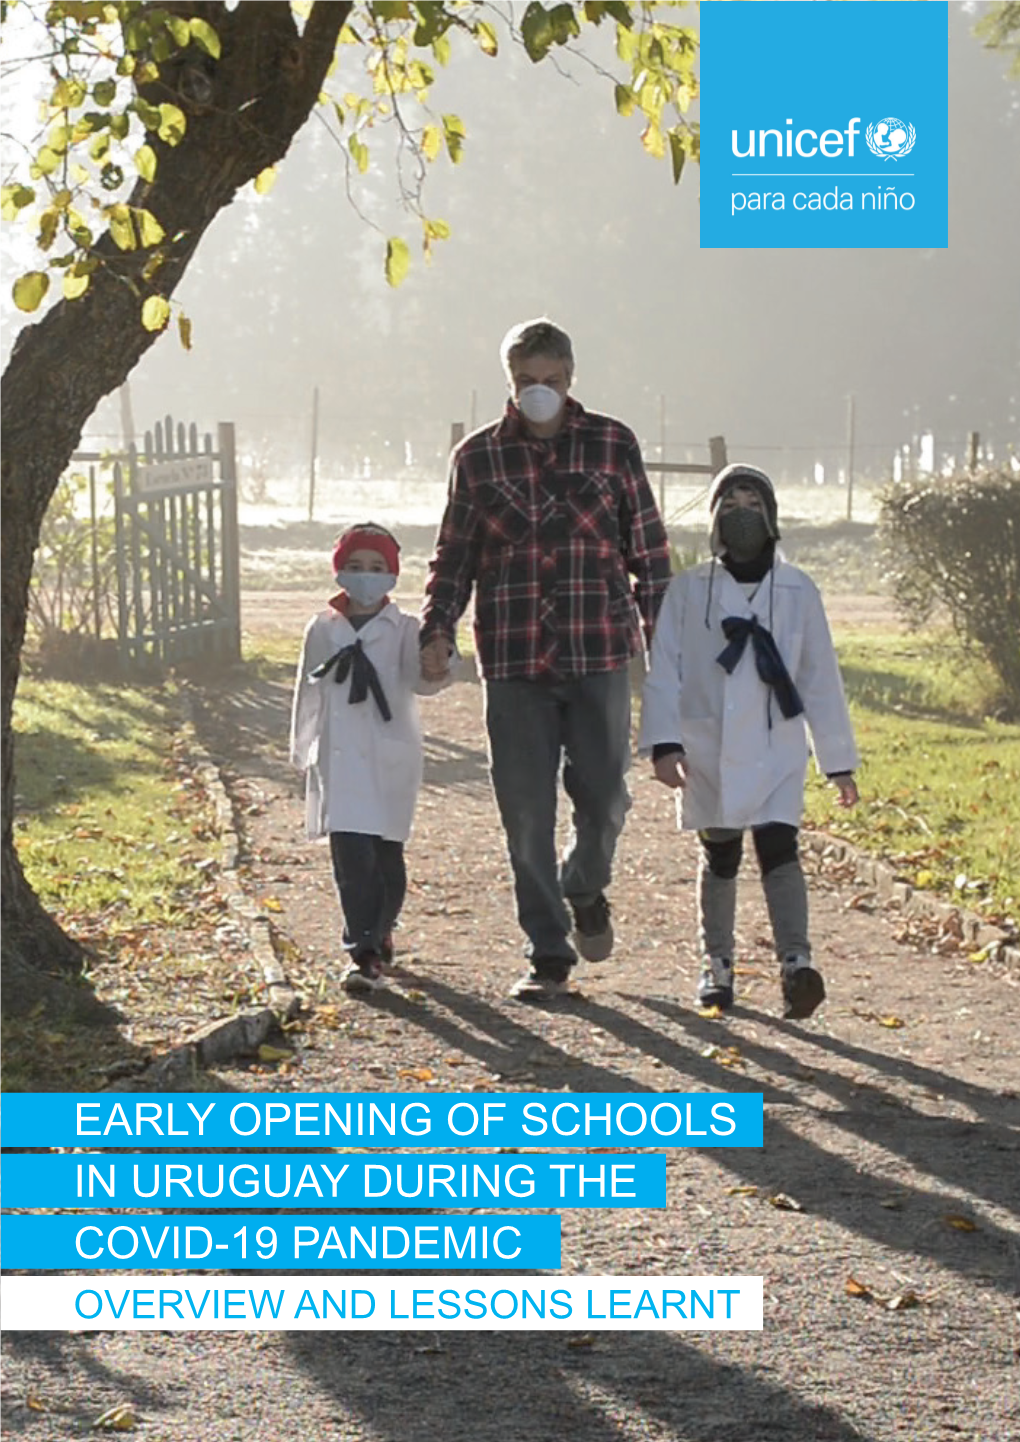 Early Opening of Schools in Uruguay During the Covid-19 Pandemic